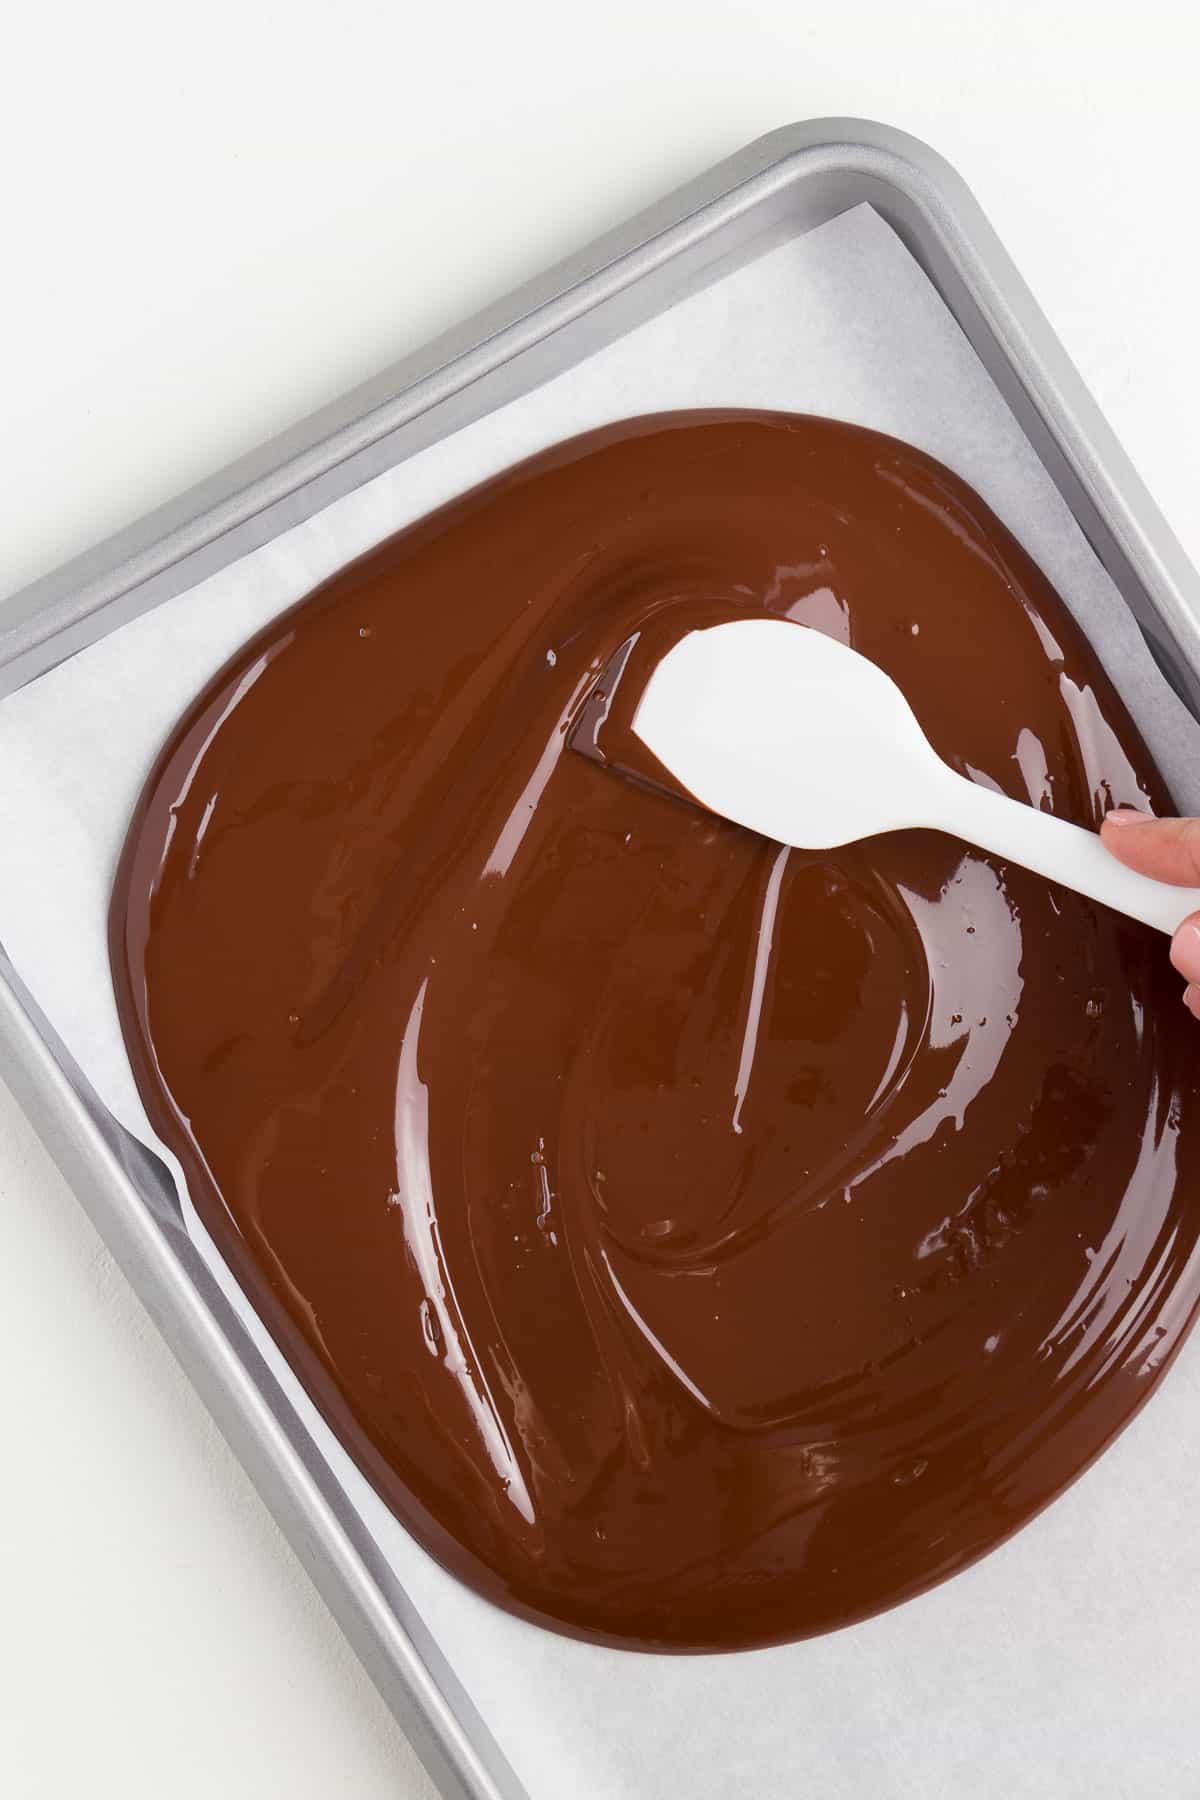 hand holding a white spatula spreading melted chocolate across a silver baking sheet